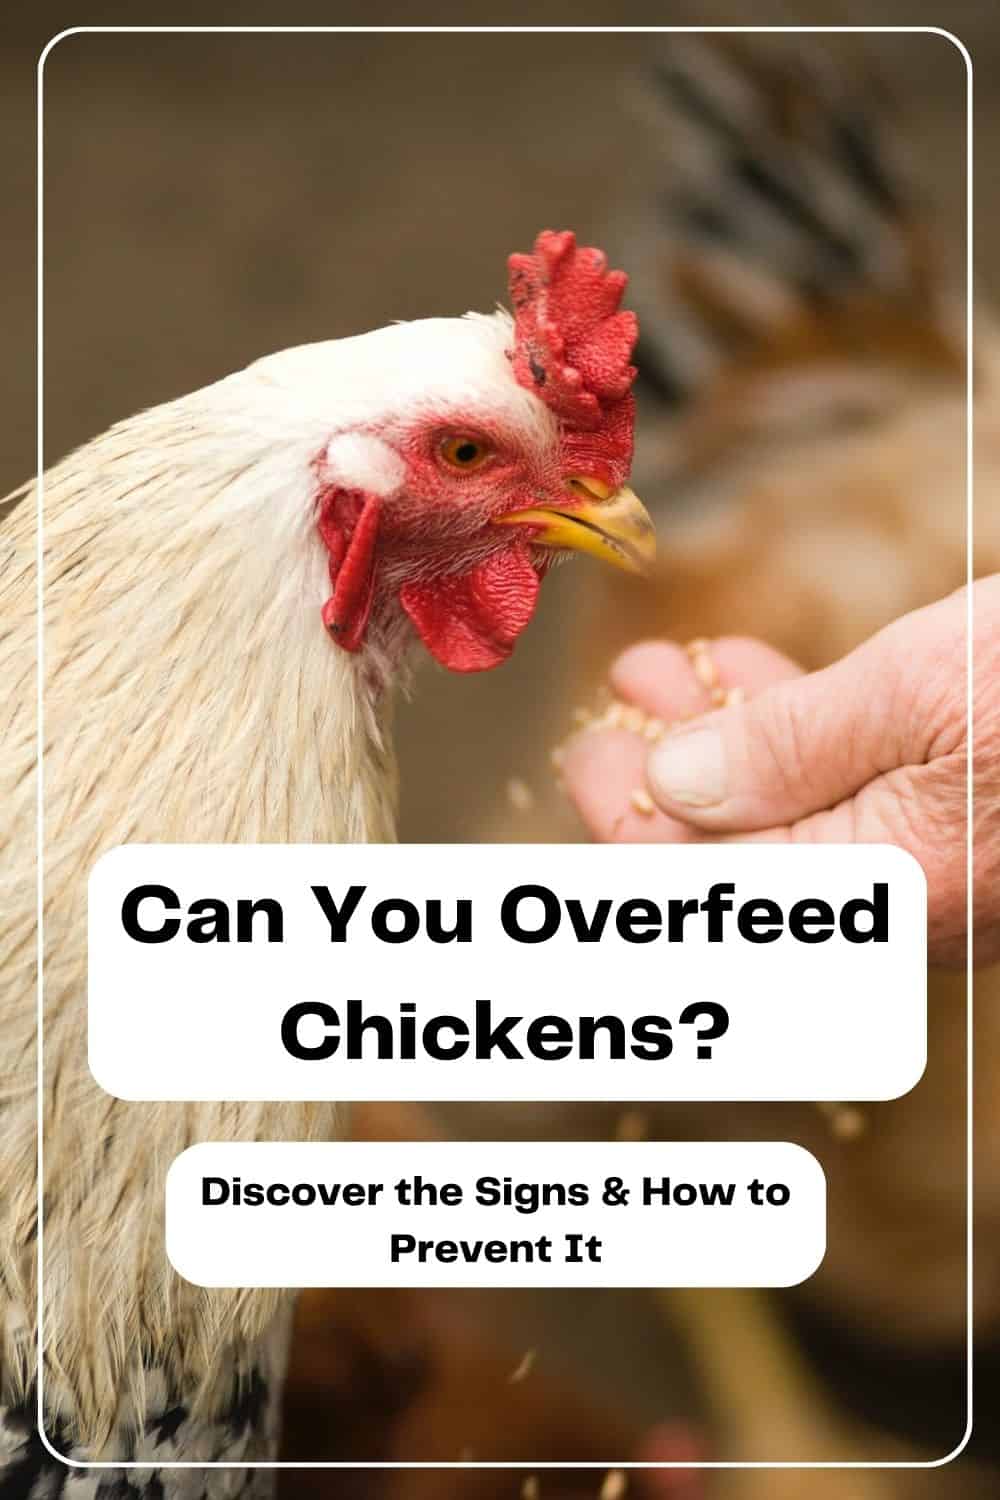 Can You Overfeed Chickens